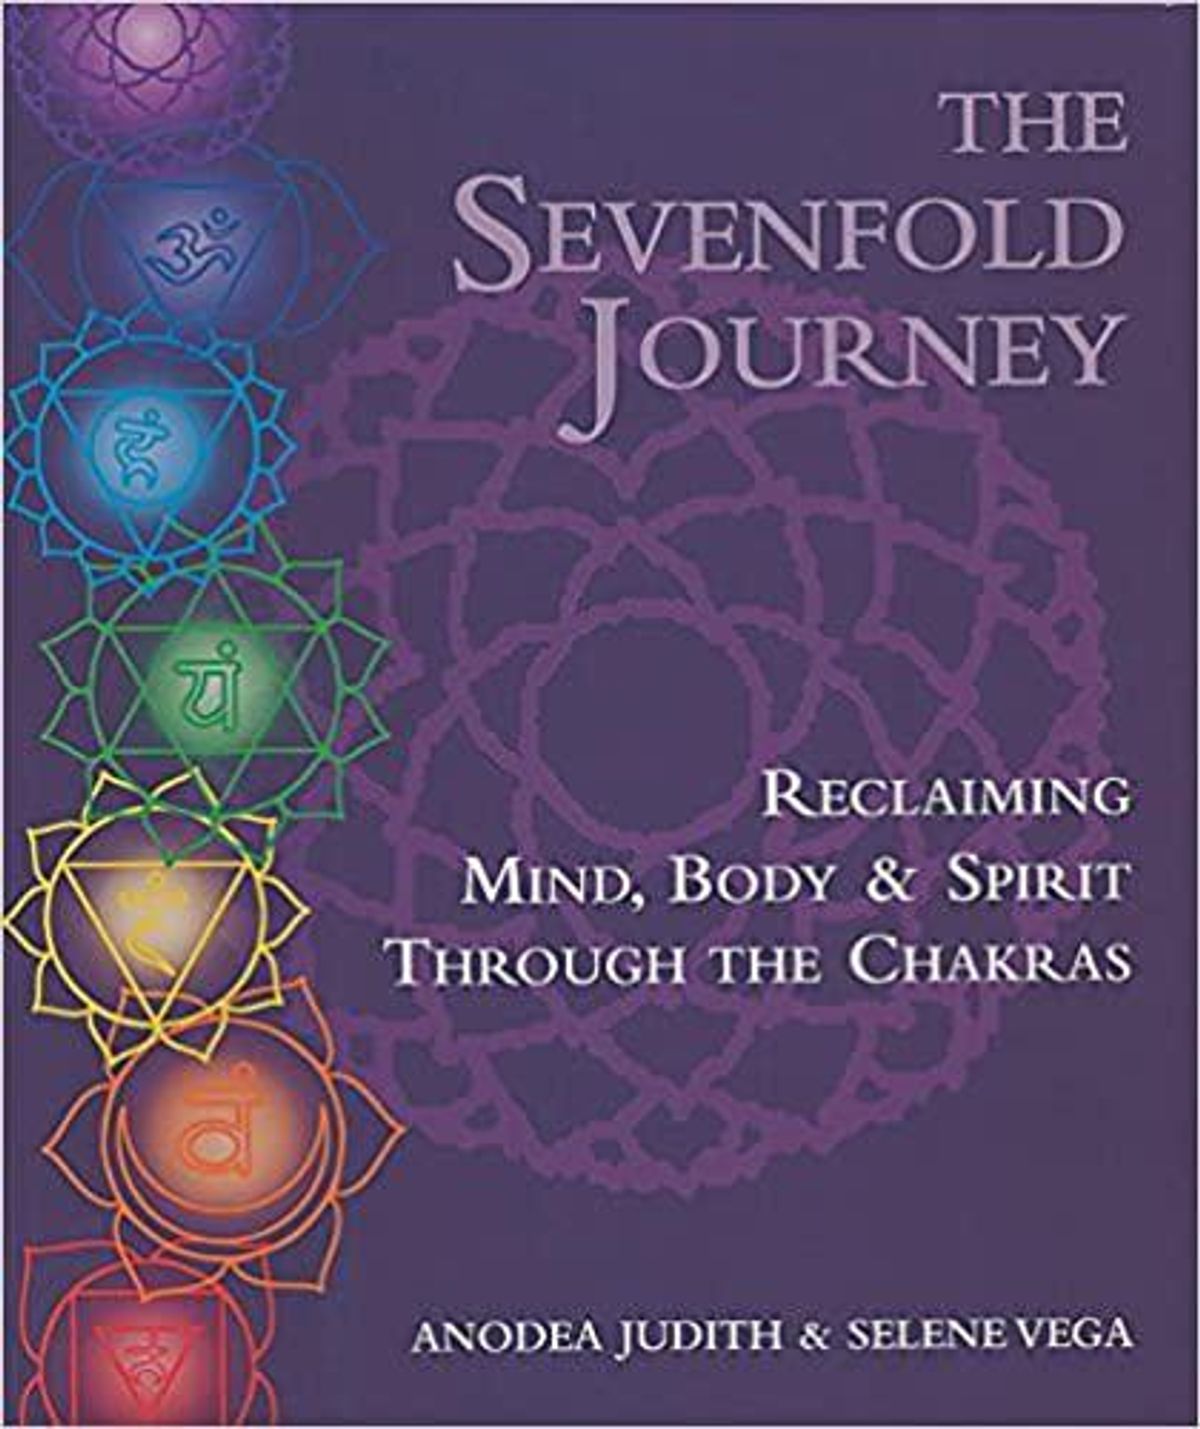 anodea judith the sevenfold journey reclaiming mind body and spirit through the chakras